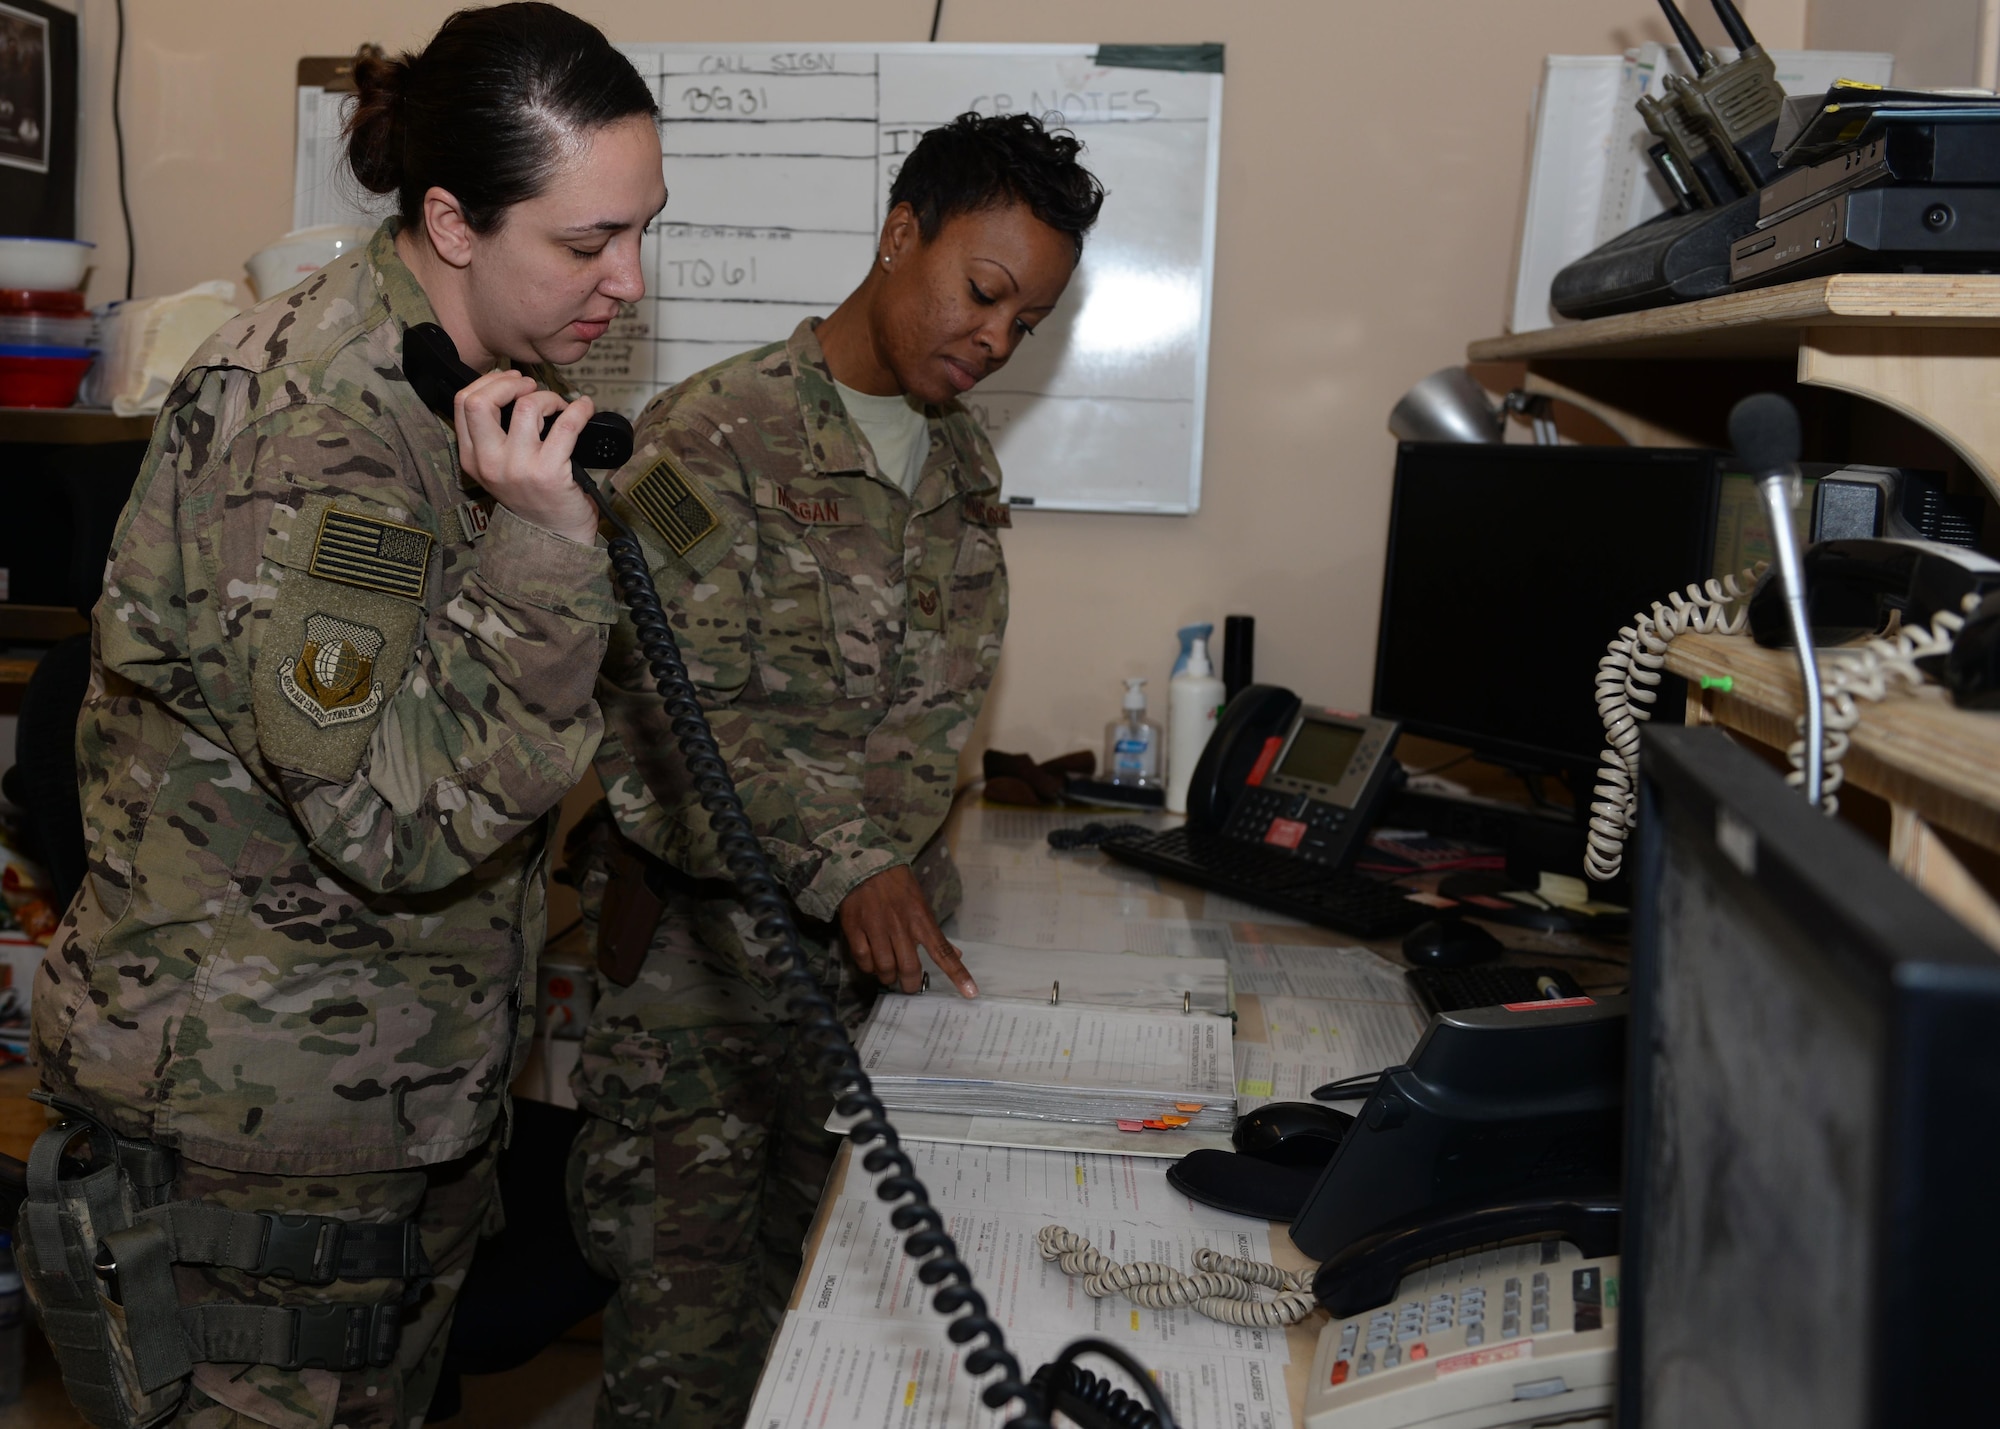 U.S. Air Force Tech. Sgt. Samantha Morgan, 455th Air Expeditionary Wing Command Post non-commissioned officer in charge of operations and Staff Sgt. Sidra Bright, 455th AEW non-commissioned officer in charge of command post systems, assist each other in disseminating mission critical information to wing leadership July 6, 2015, at Bagram Airfield, Afghanistan. The BAF Command Post team is responsible for initiating wing recalls, relaying weather and inbound attack notifications to the base as well as work with aircrews and other various agencies in keeping the base abreast on important information. (U.S. Air Force photo by Senior Airman Cierra Presentado/Released)